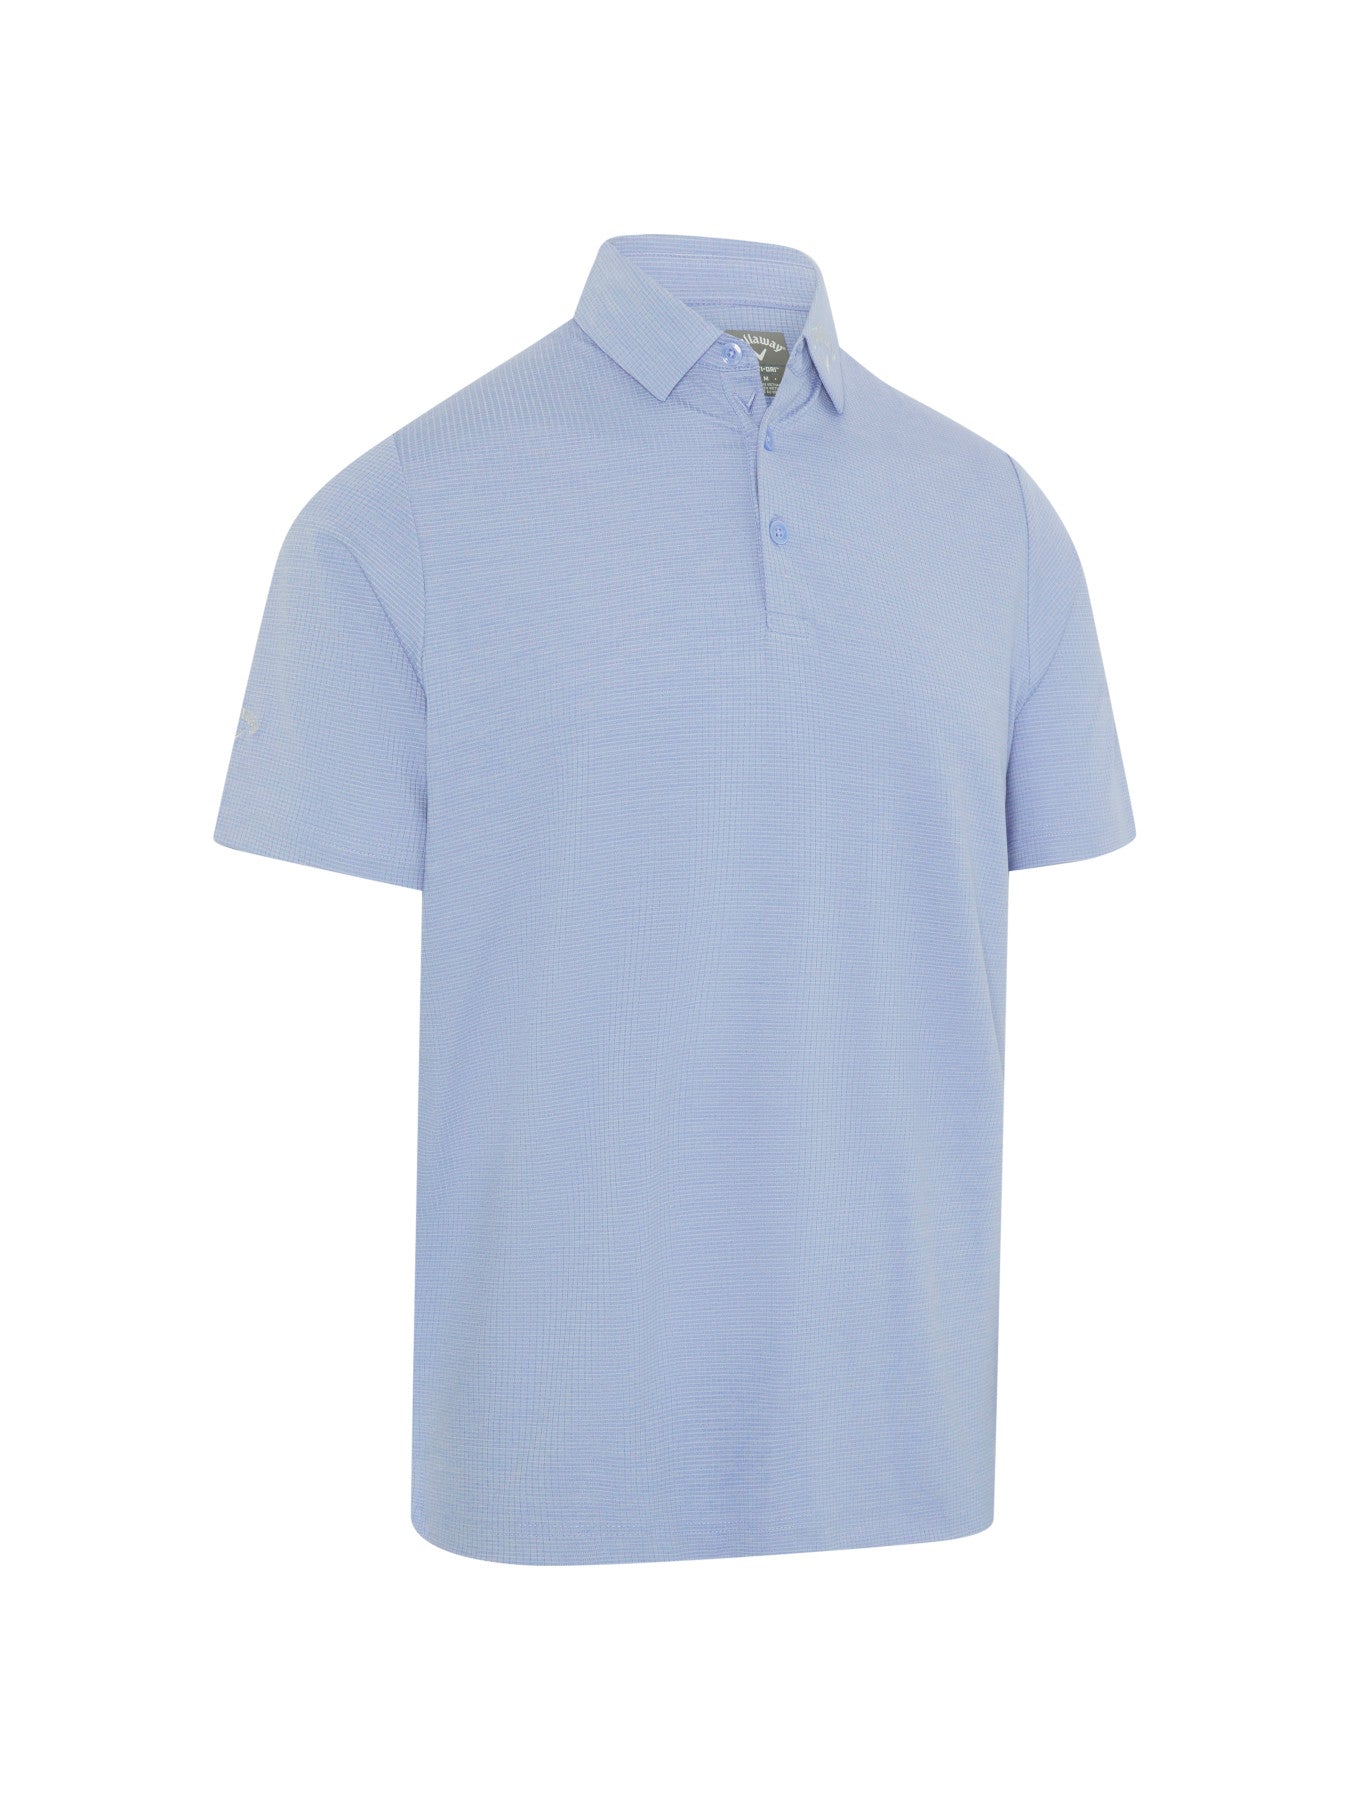 View Ventilated Classic Jacquard Polo In Chambray information